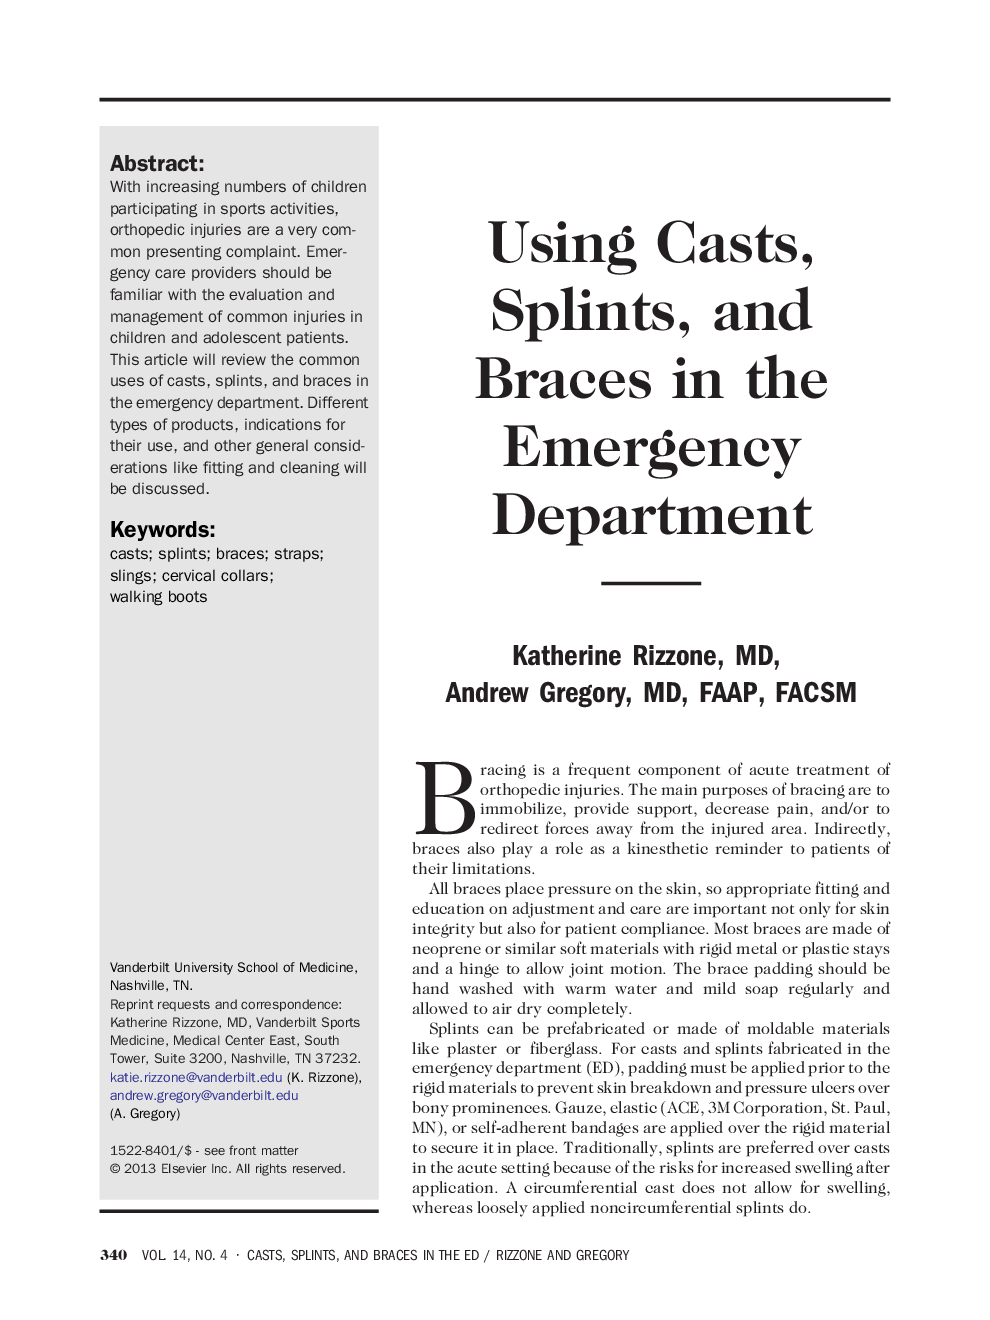 Using Casts, Splints, and Braces in the Emergency Department